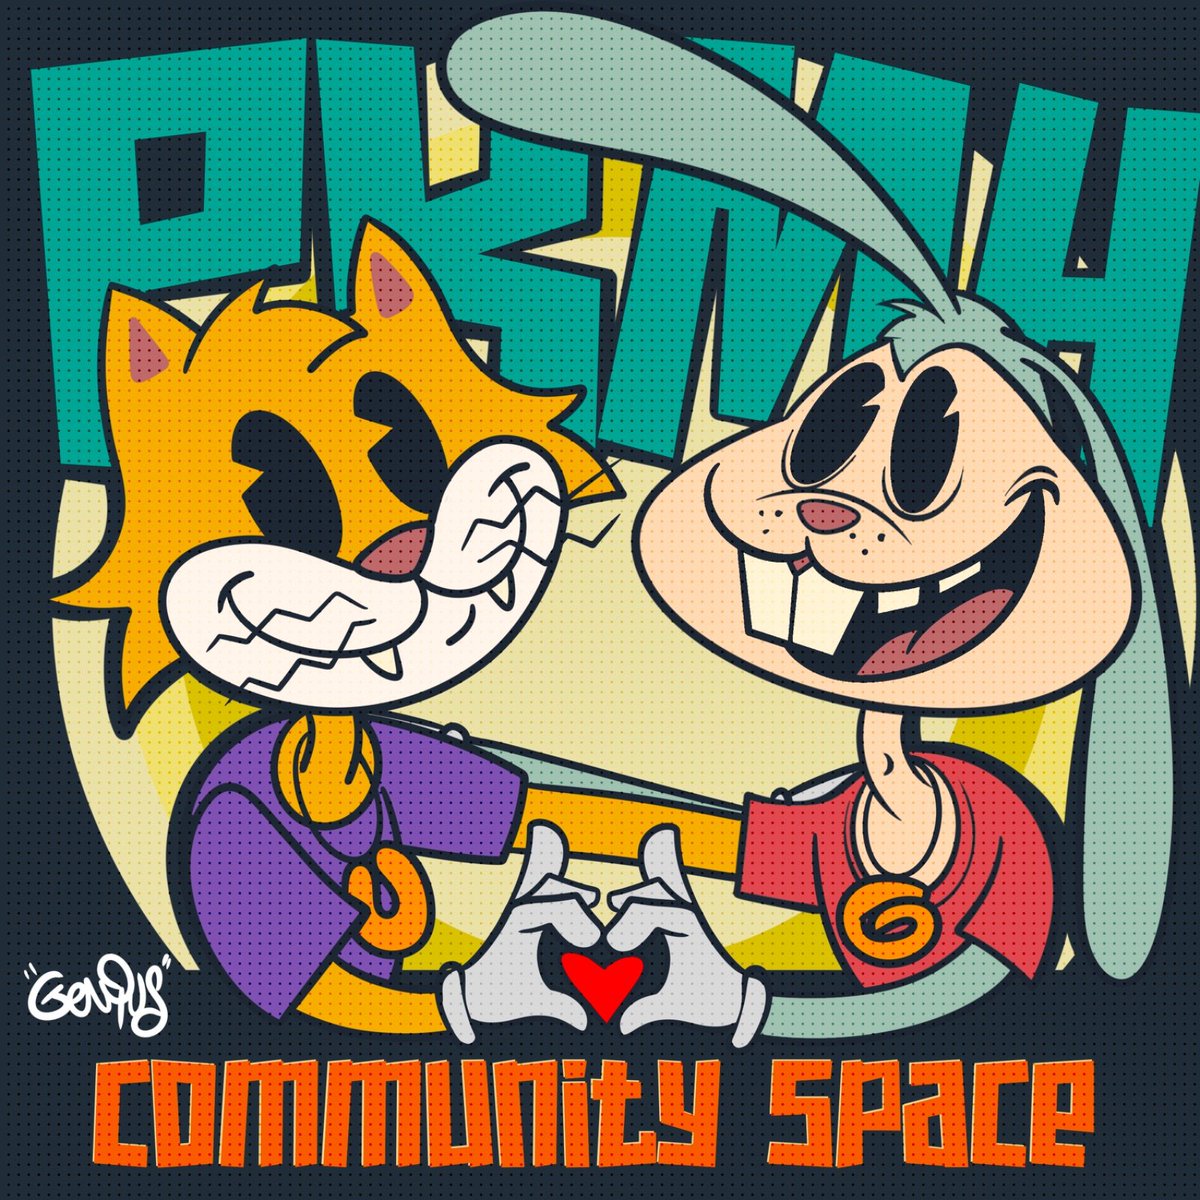 🌀 Join us for the latest MadPsycho Community Space Episode 4! Hang out with our Psycho 😼 & Mad 🐰 as we dive into one MadPsycho Web3 community. 🕓 Mon. 5/6 at 4PM ET/ 8PM UTC! #MadPsycho #CommunitySpace Set a reminder for my upcoming Space! x.com/i/spaces/1YqGo…